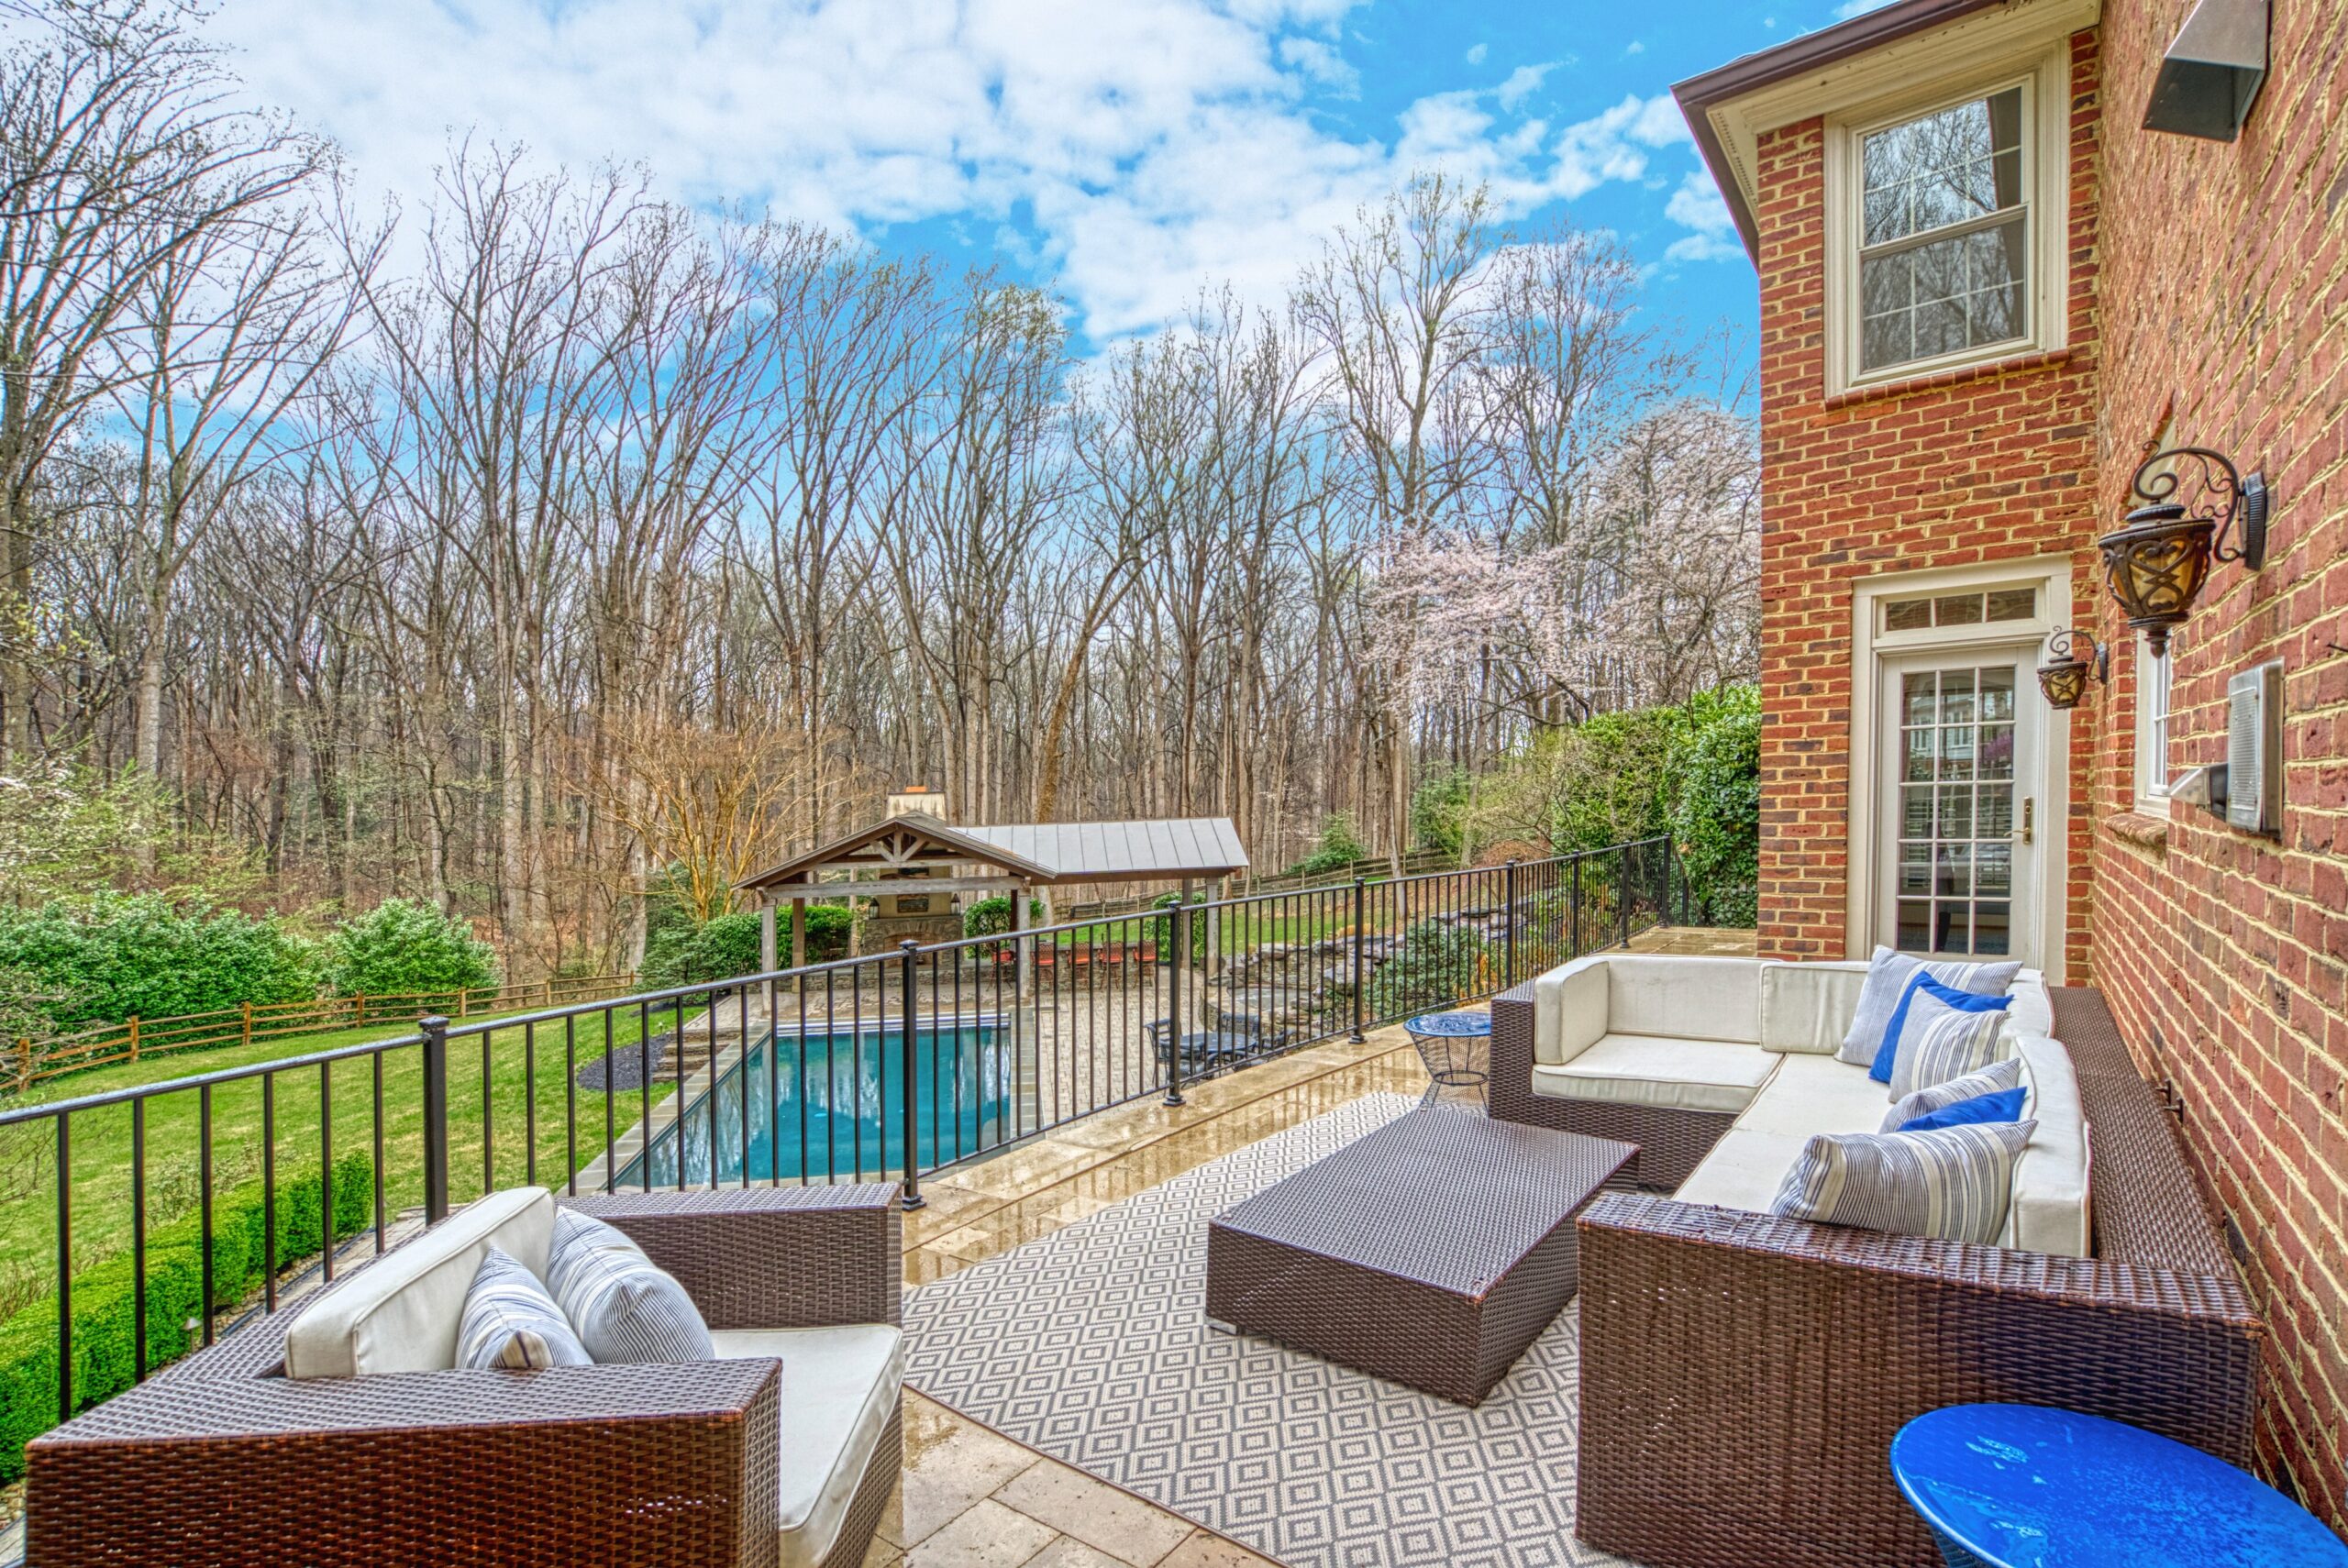 Professional exterior photo of 718 Potomac Knolls Dr - showing the rear deck looking out over the heated pool